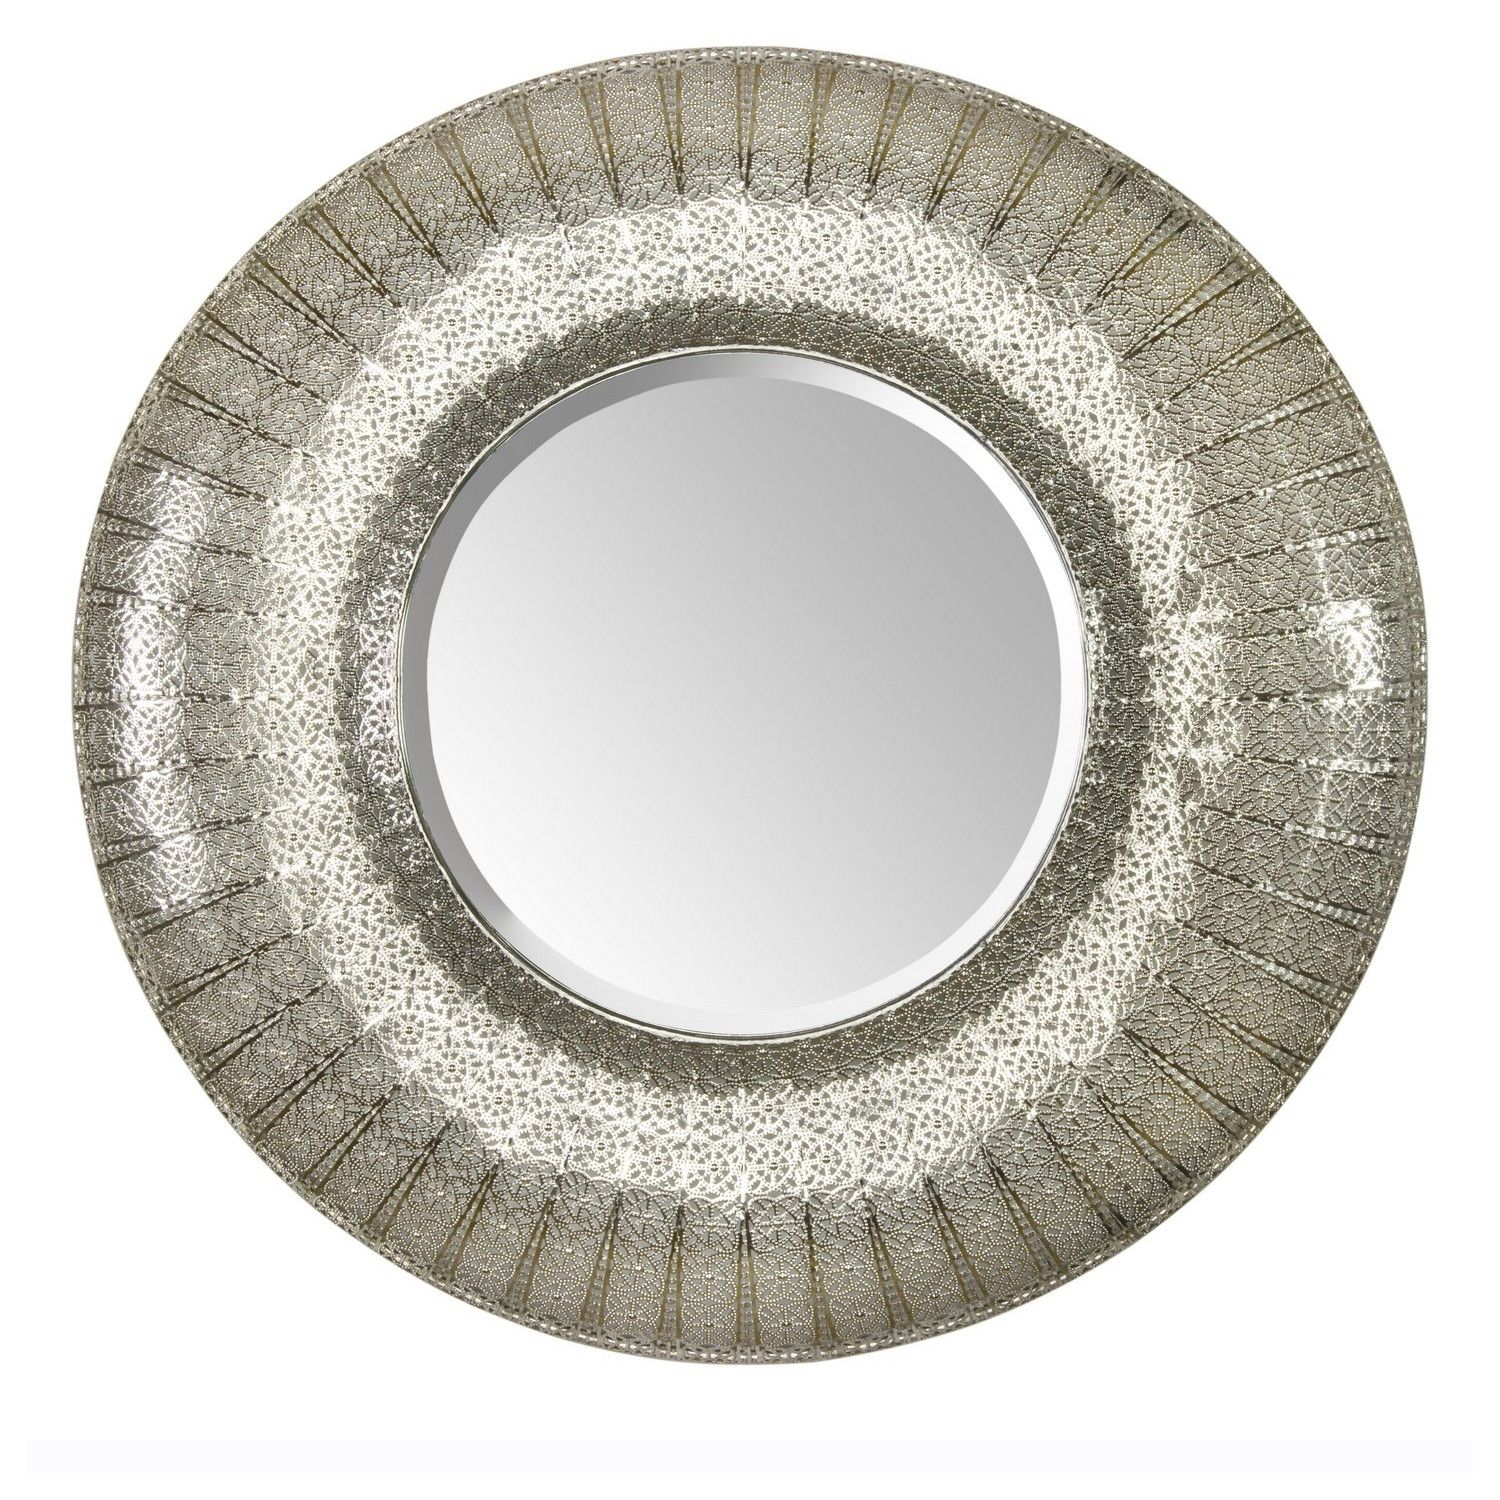 Round Moroccan Mirror The Round One In Silver 5499 Actual Regarding Contemporary Round Mirrors (View 11 of 15)